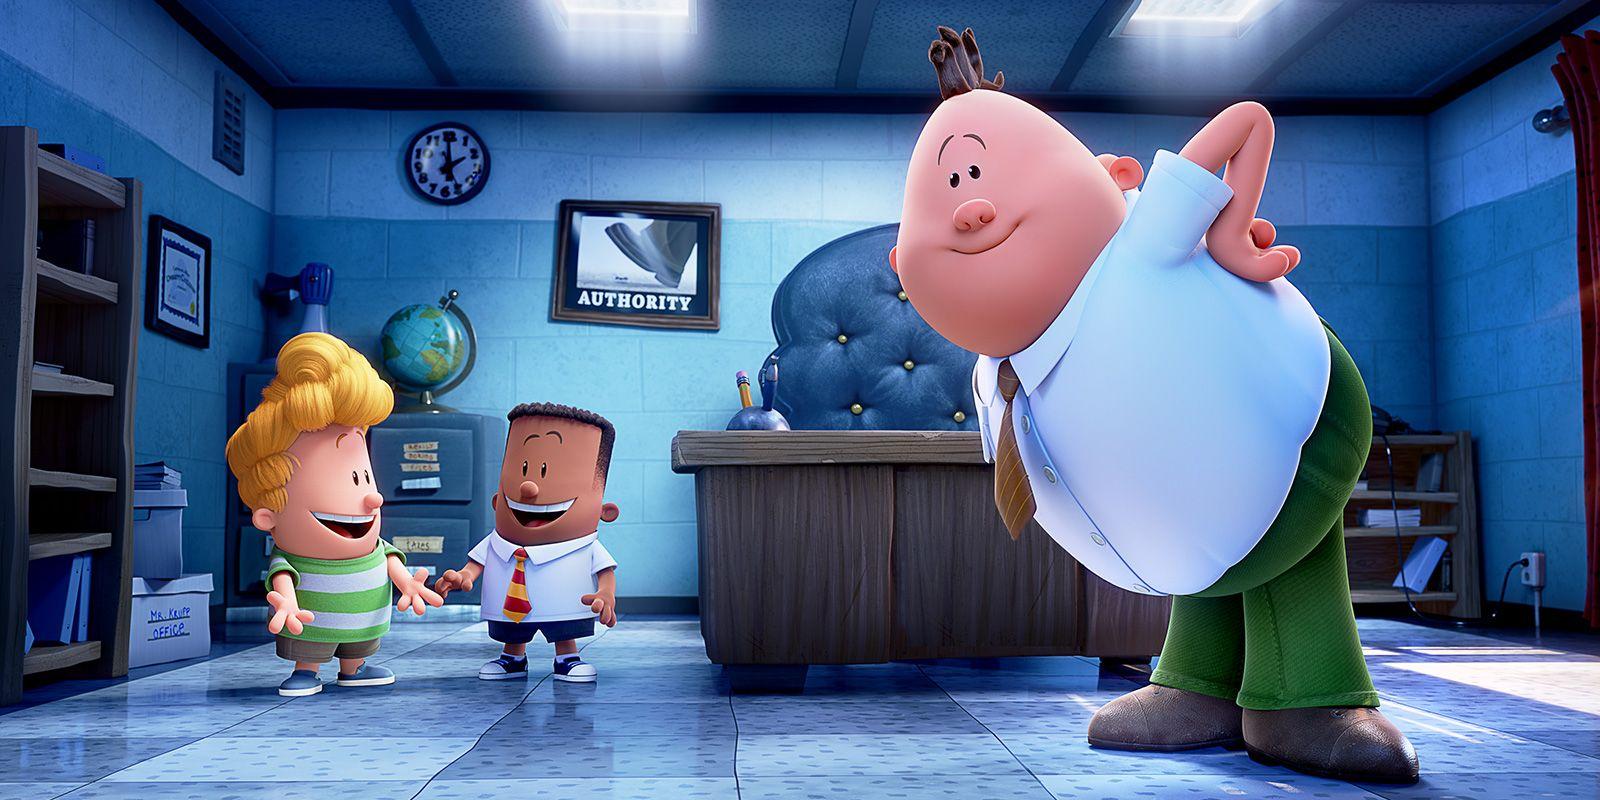 Captain Underpants: The First Epic Movie”